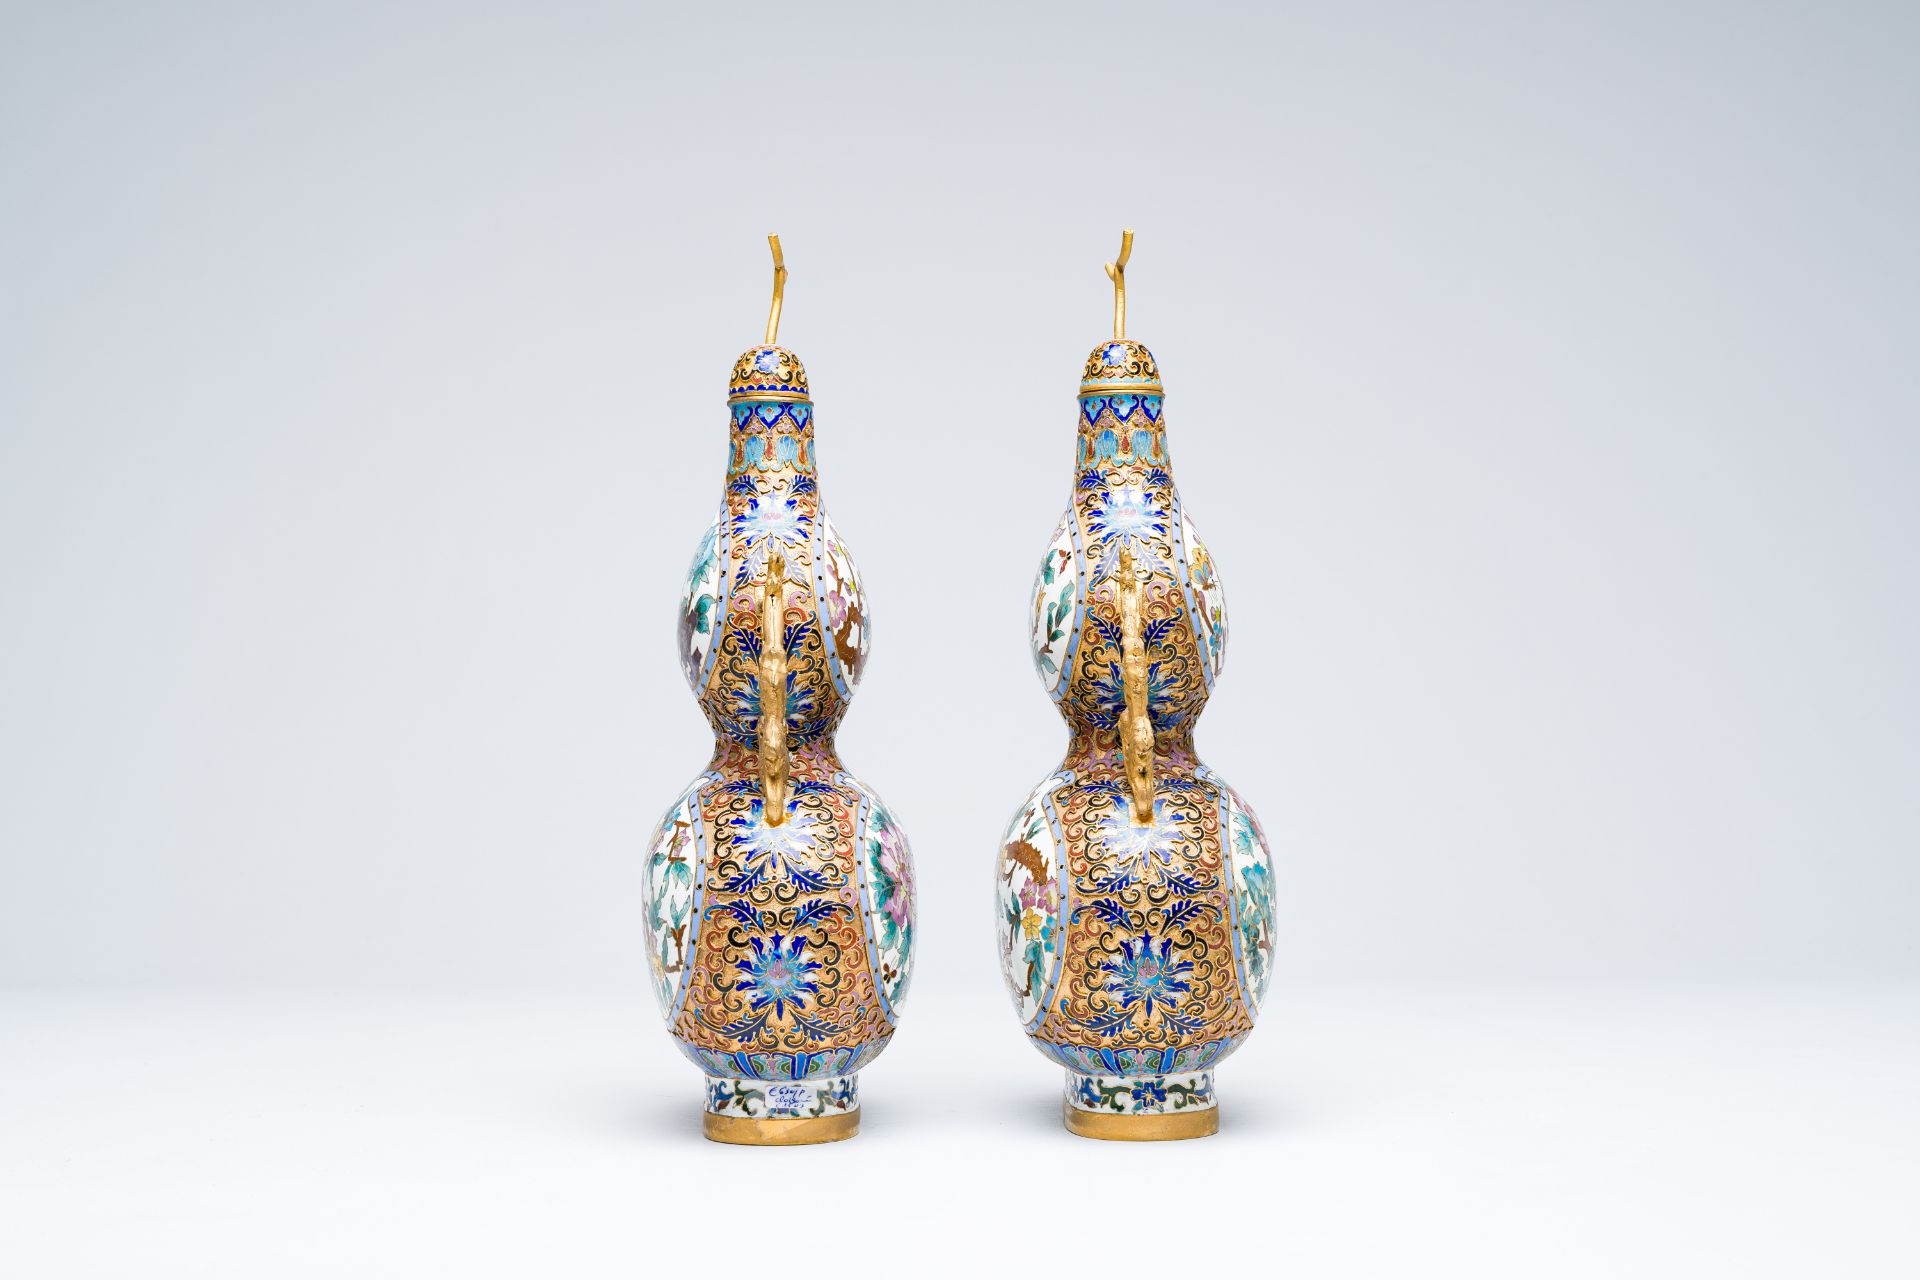 A pair of Chinese cloisonne double gourd vases on wooden stands, 20th C. - Image 3 of 9